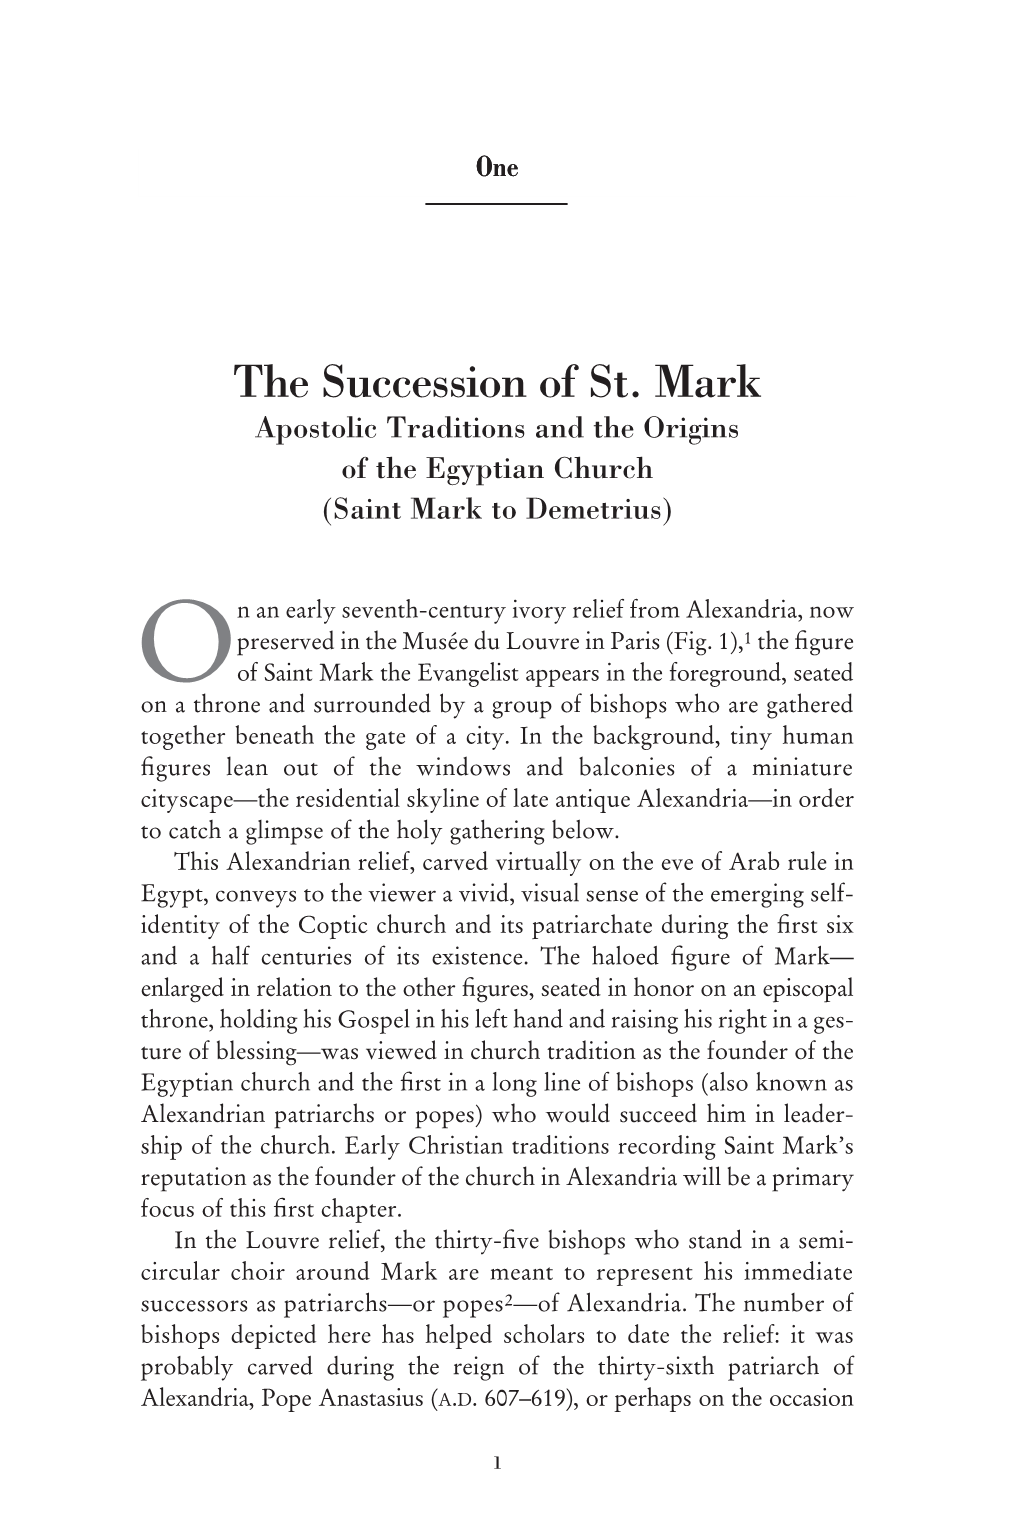 The Succession of St. Mark Apostolic Traditions and the Origins of the Egyptian Church (Saint Mark to Demetrius)